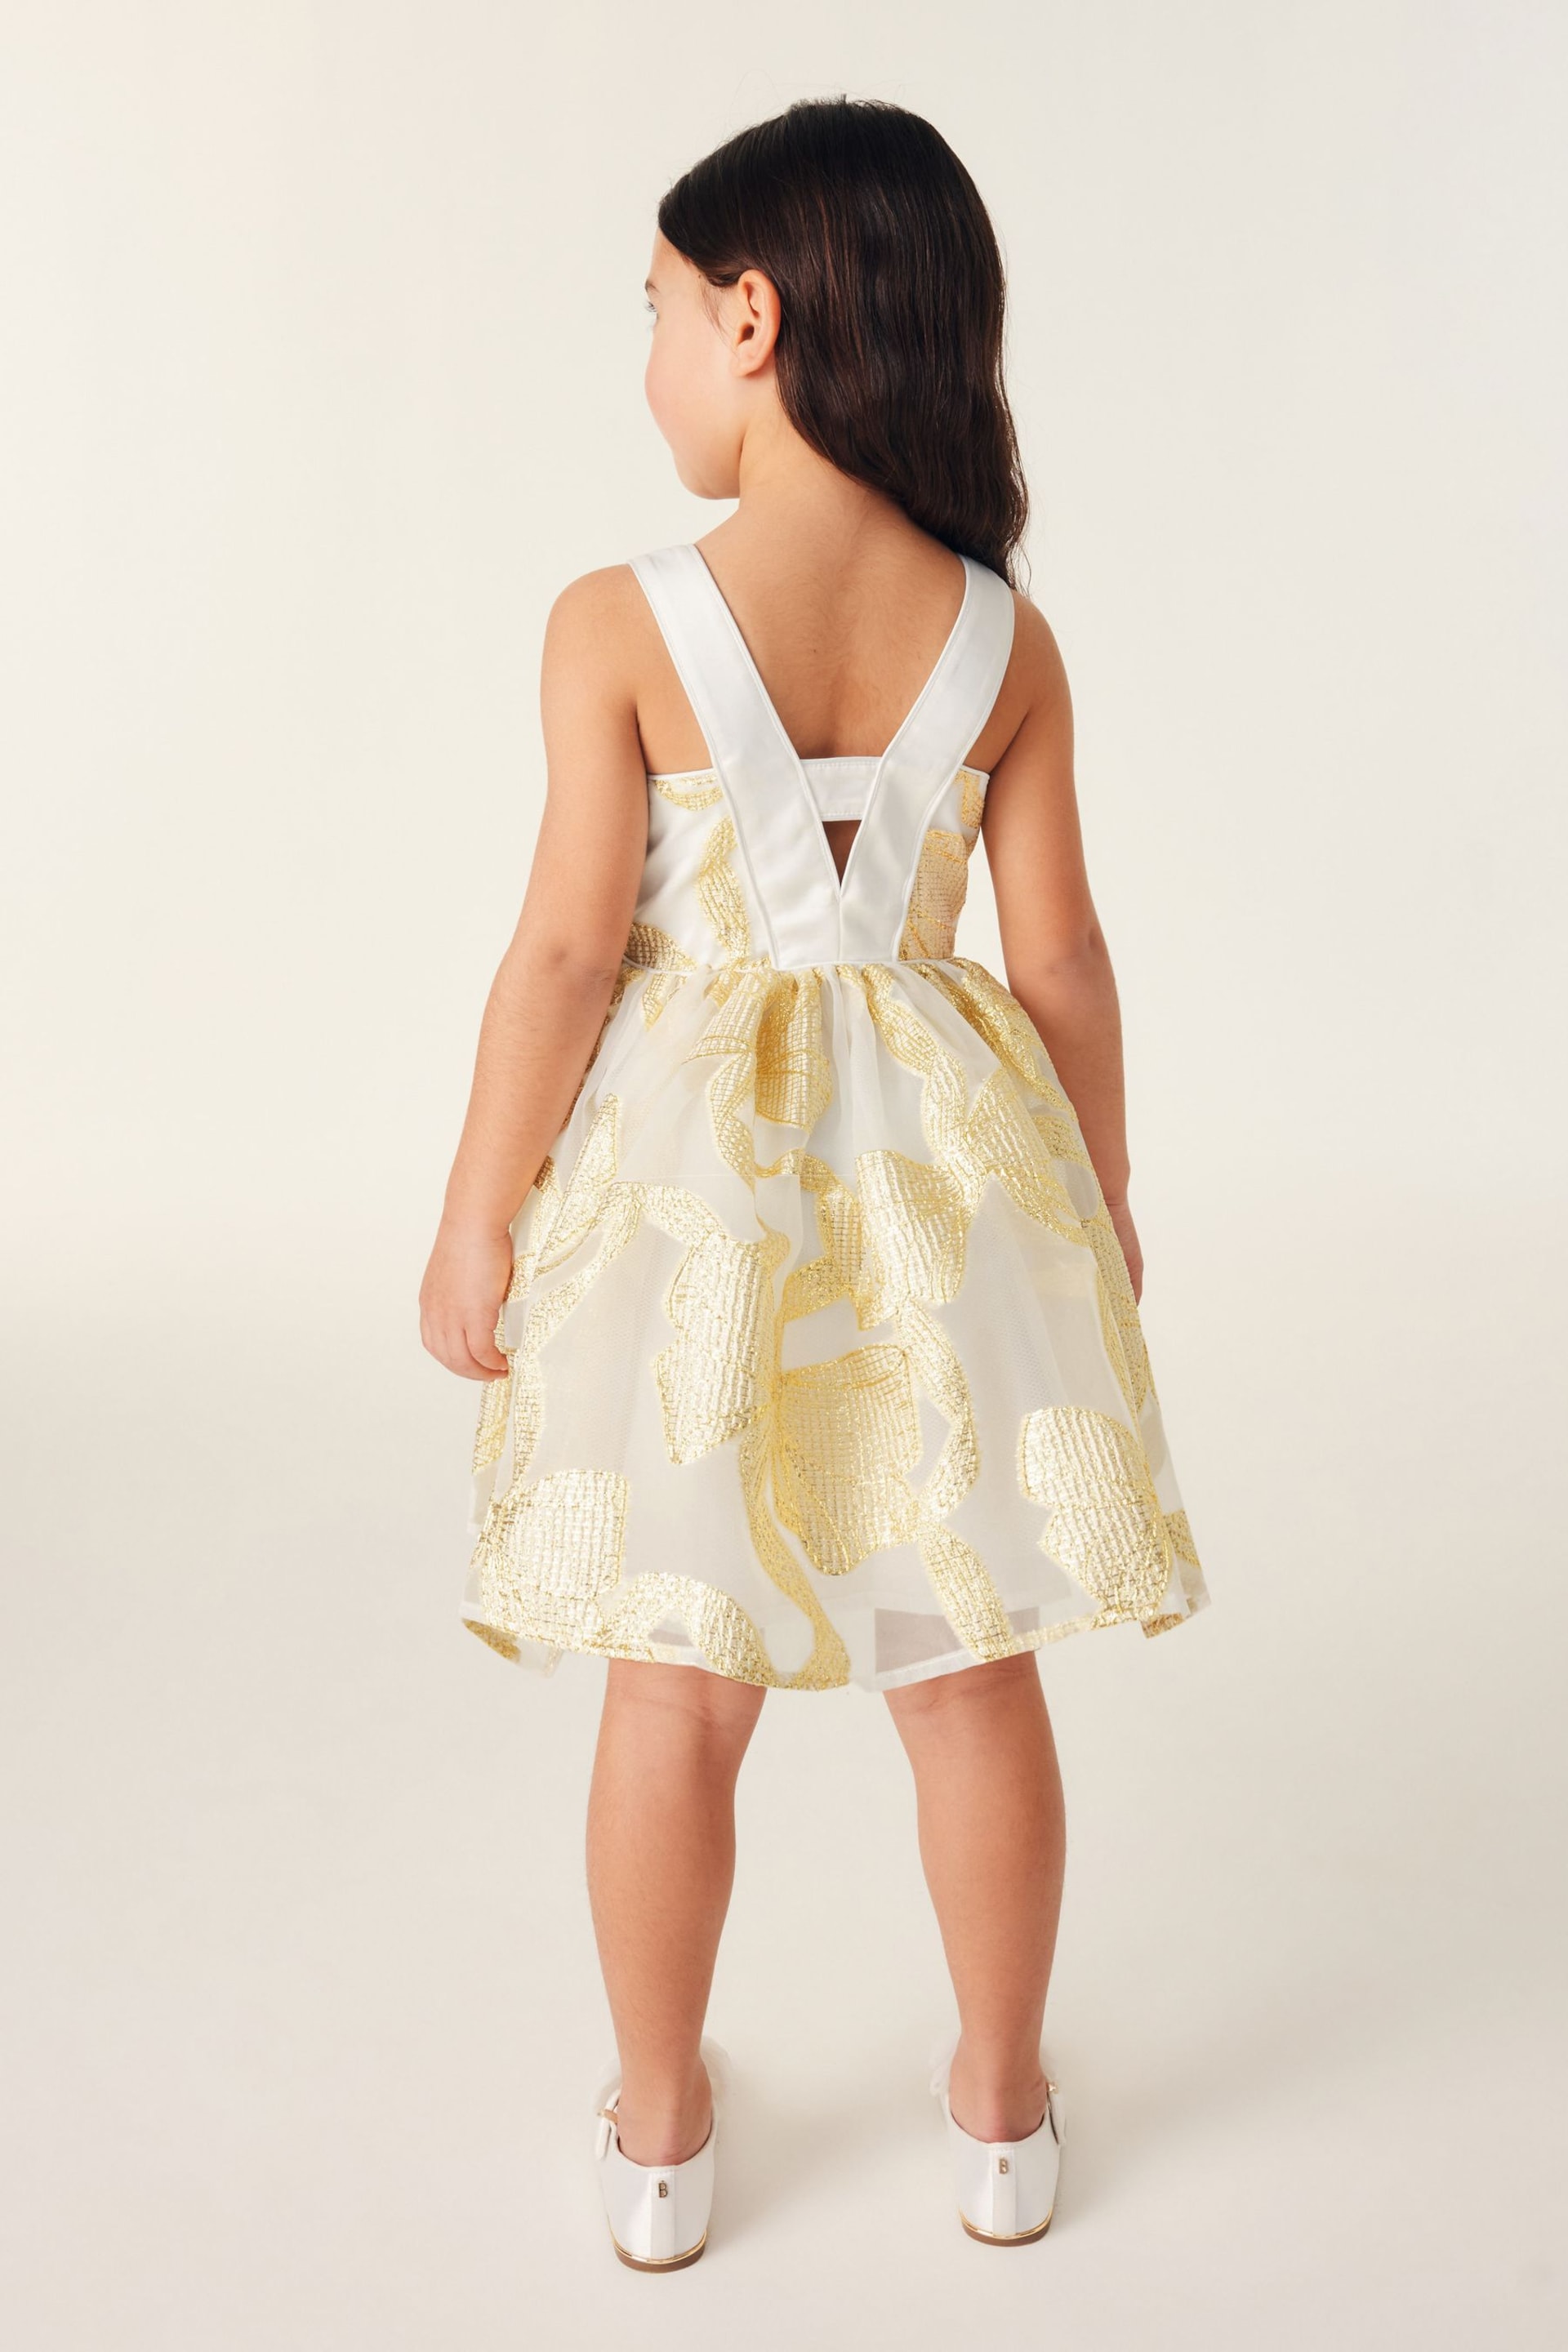 Baker by Ted Baker Sparkly Bow Jacquard Dress - Image 3 of 12